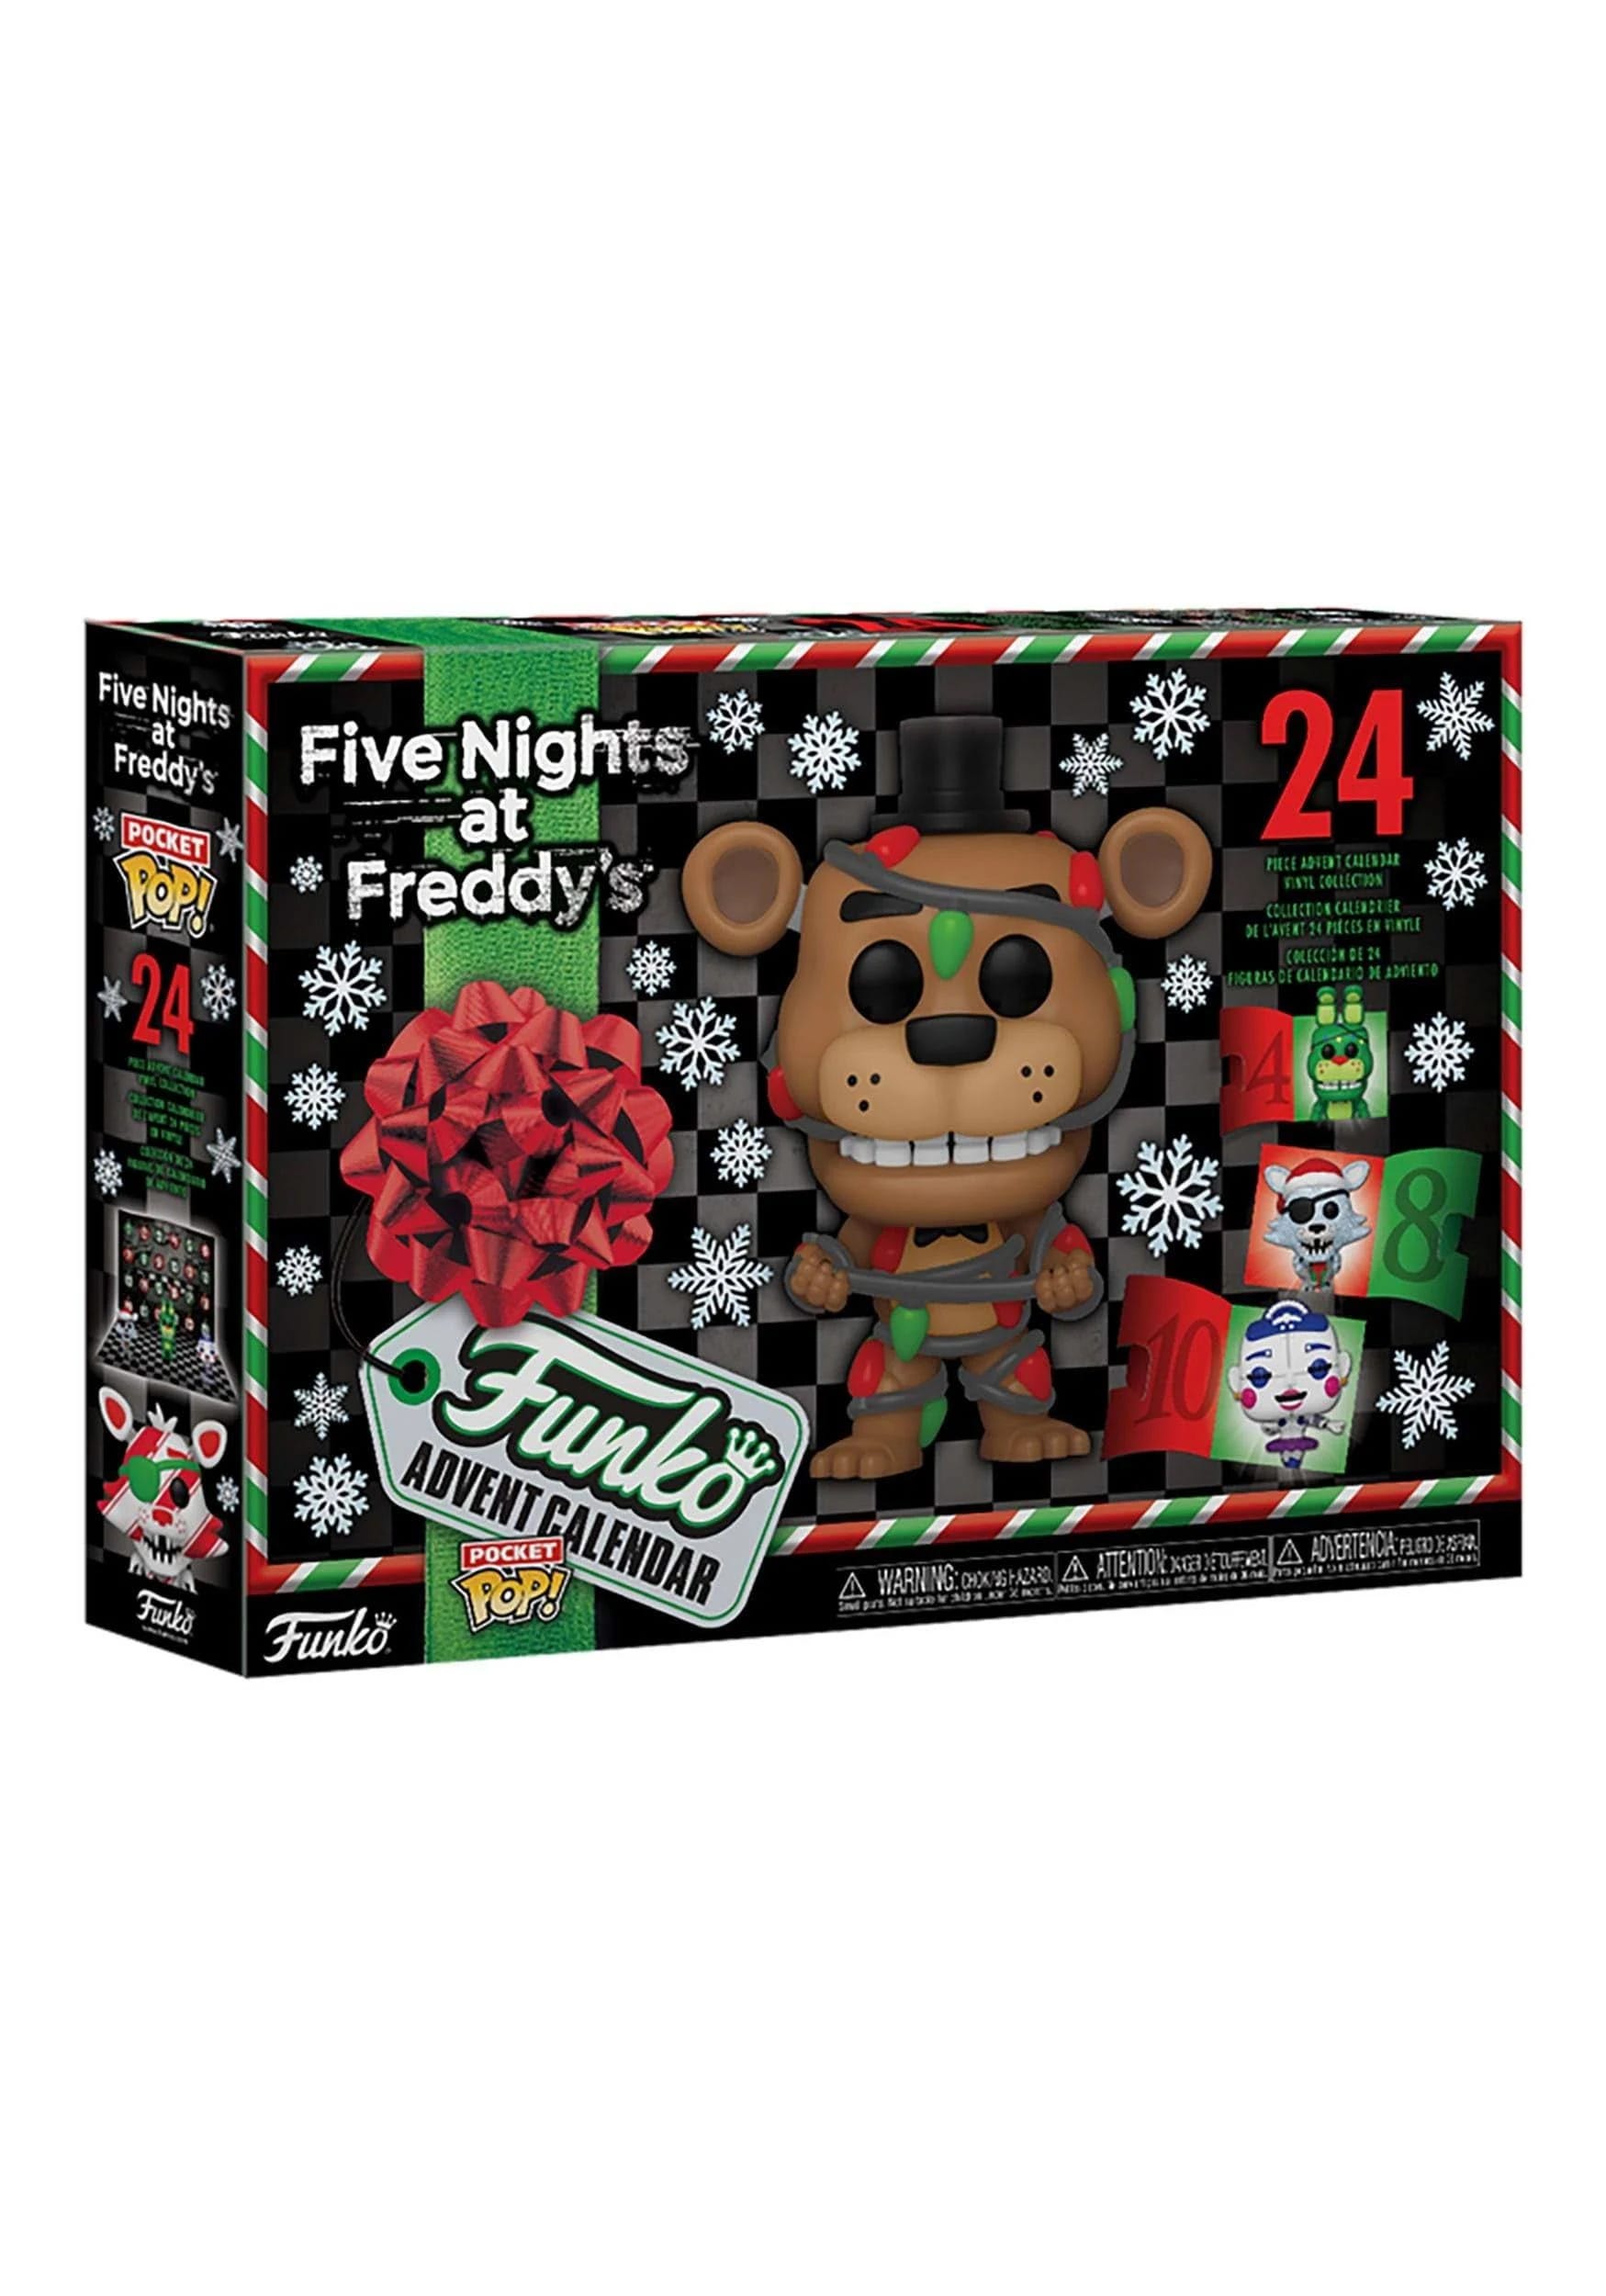 Countdown to Christmas with the Five Nights at Freddy’s 24 Day Advent Calendar | Image